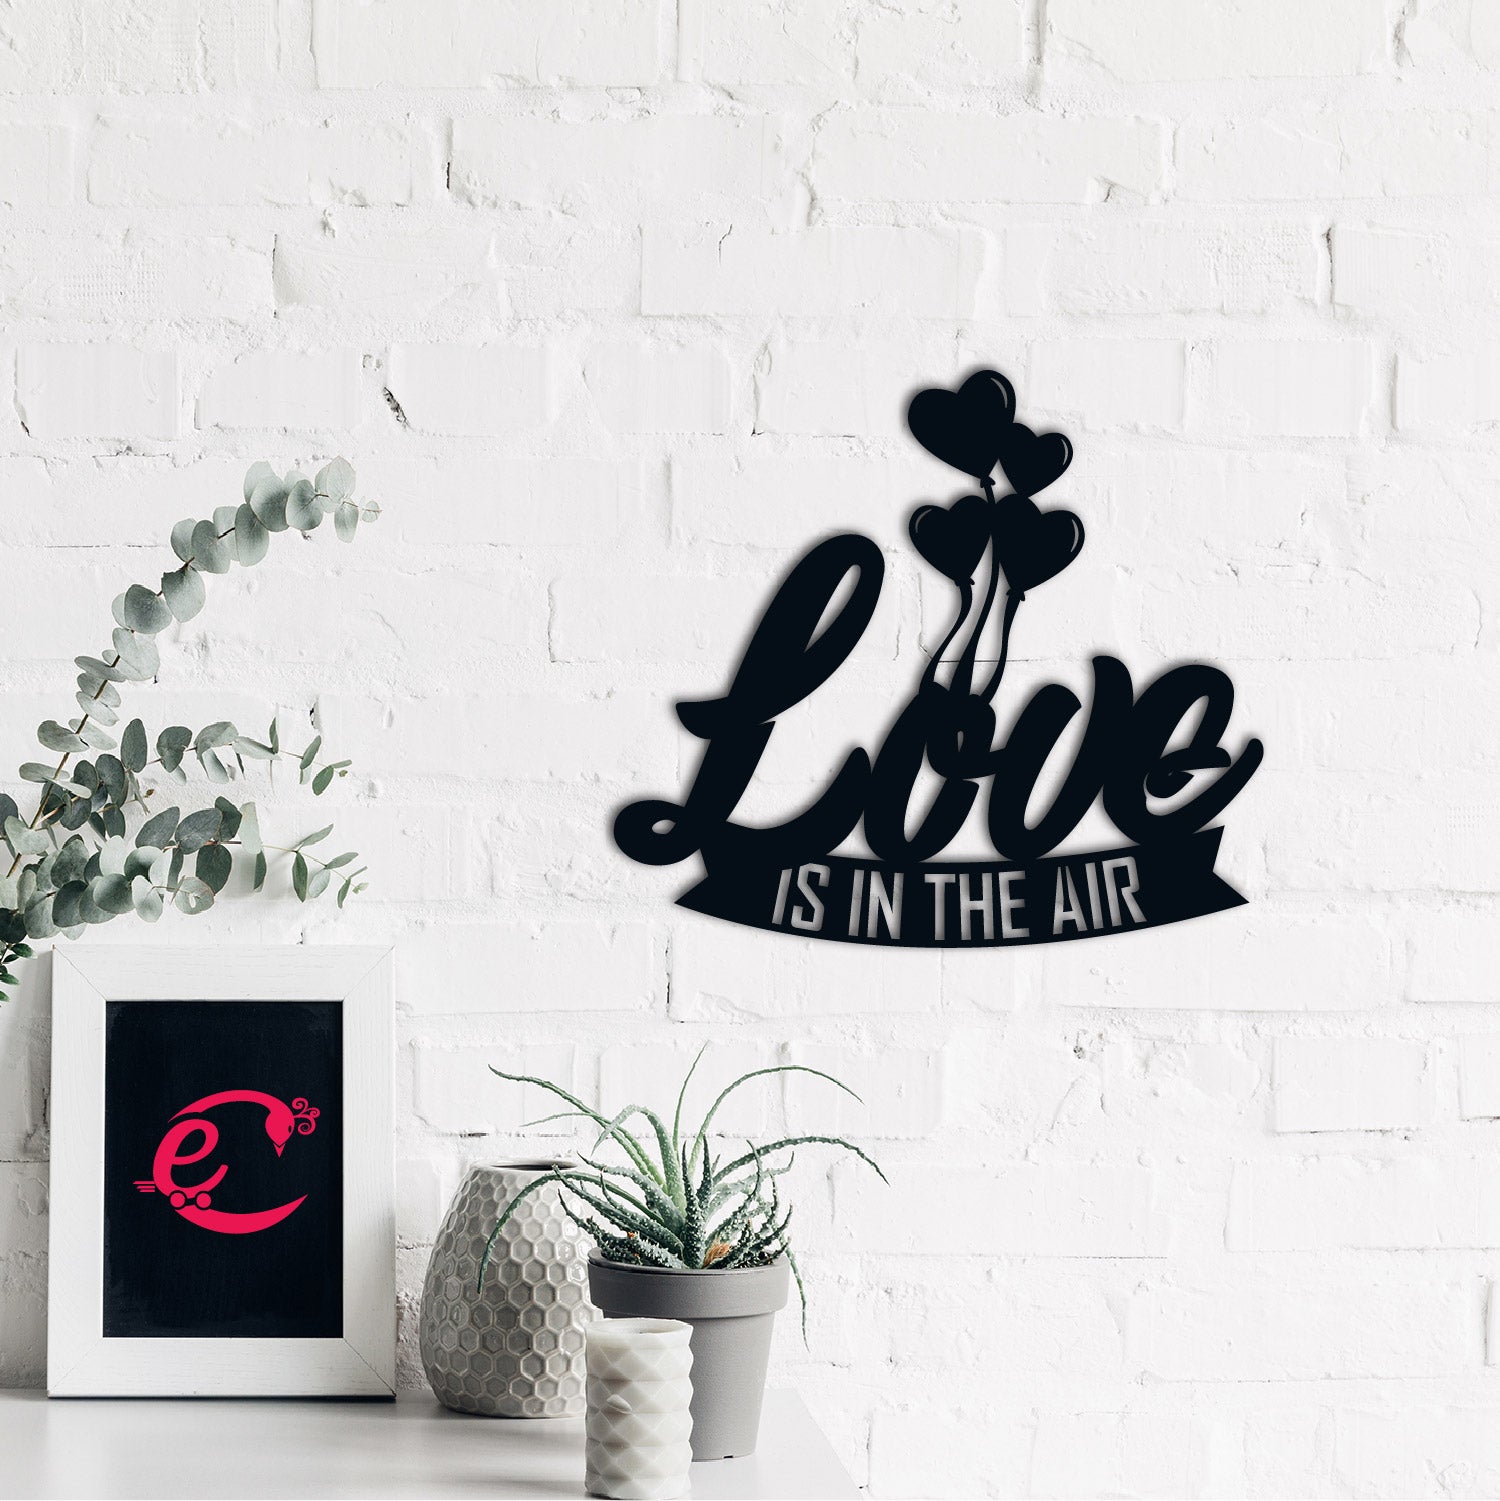 "Love is in the air with Hearth Balloons" Black Engineered Wood Wall Art Cutout, Ready to Hang Home Decor